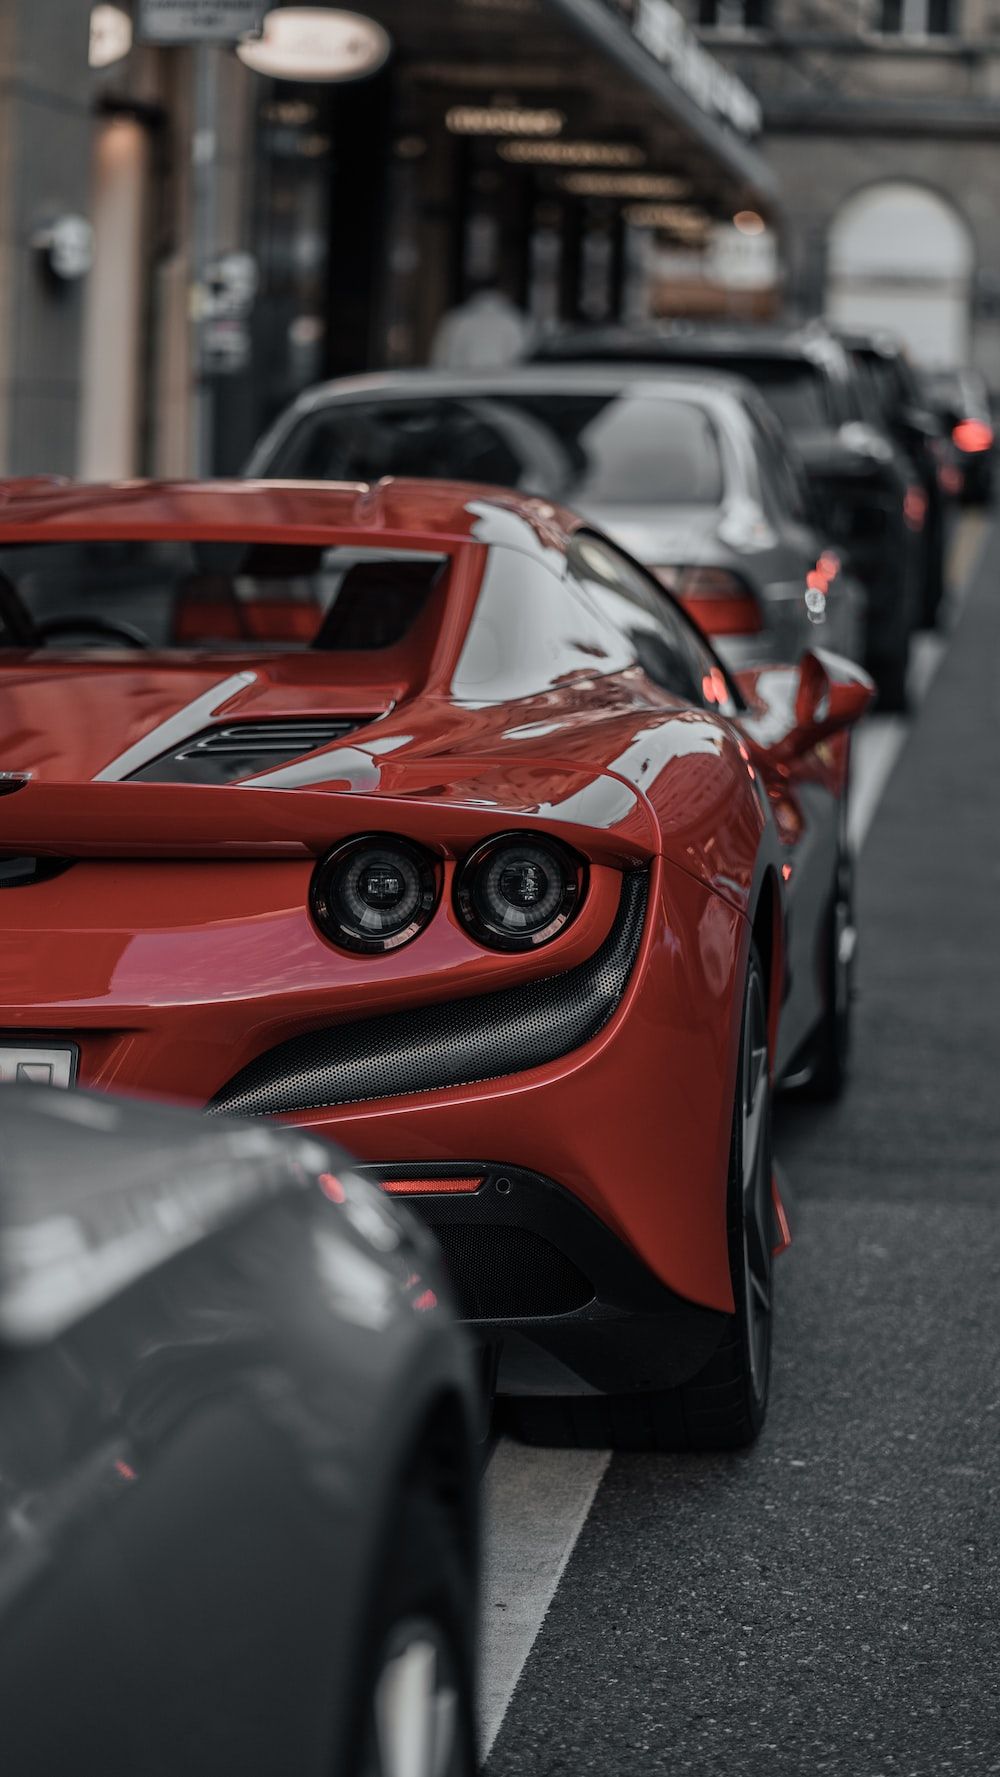 A red sports car is parked on the side of the road - Cars